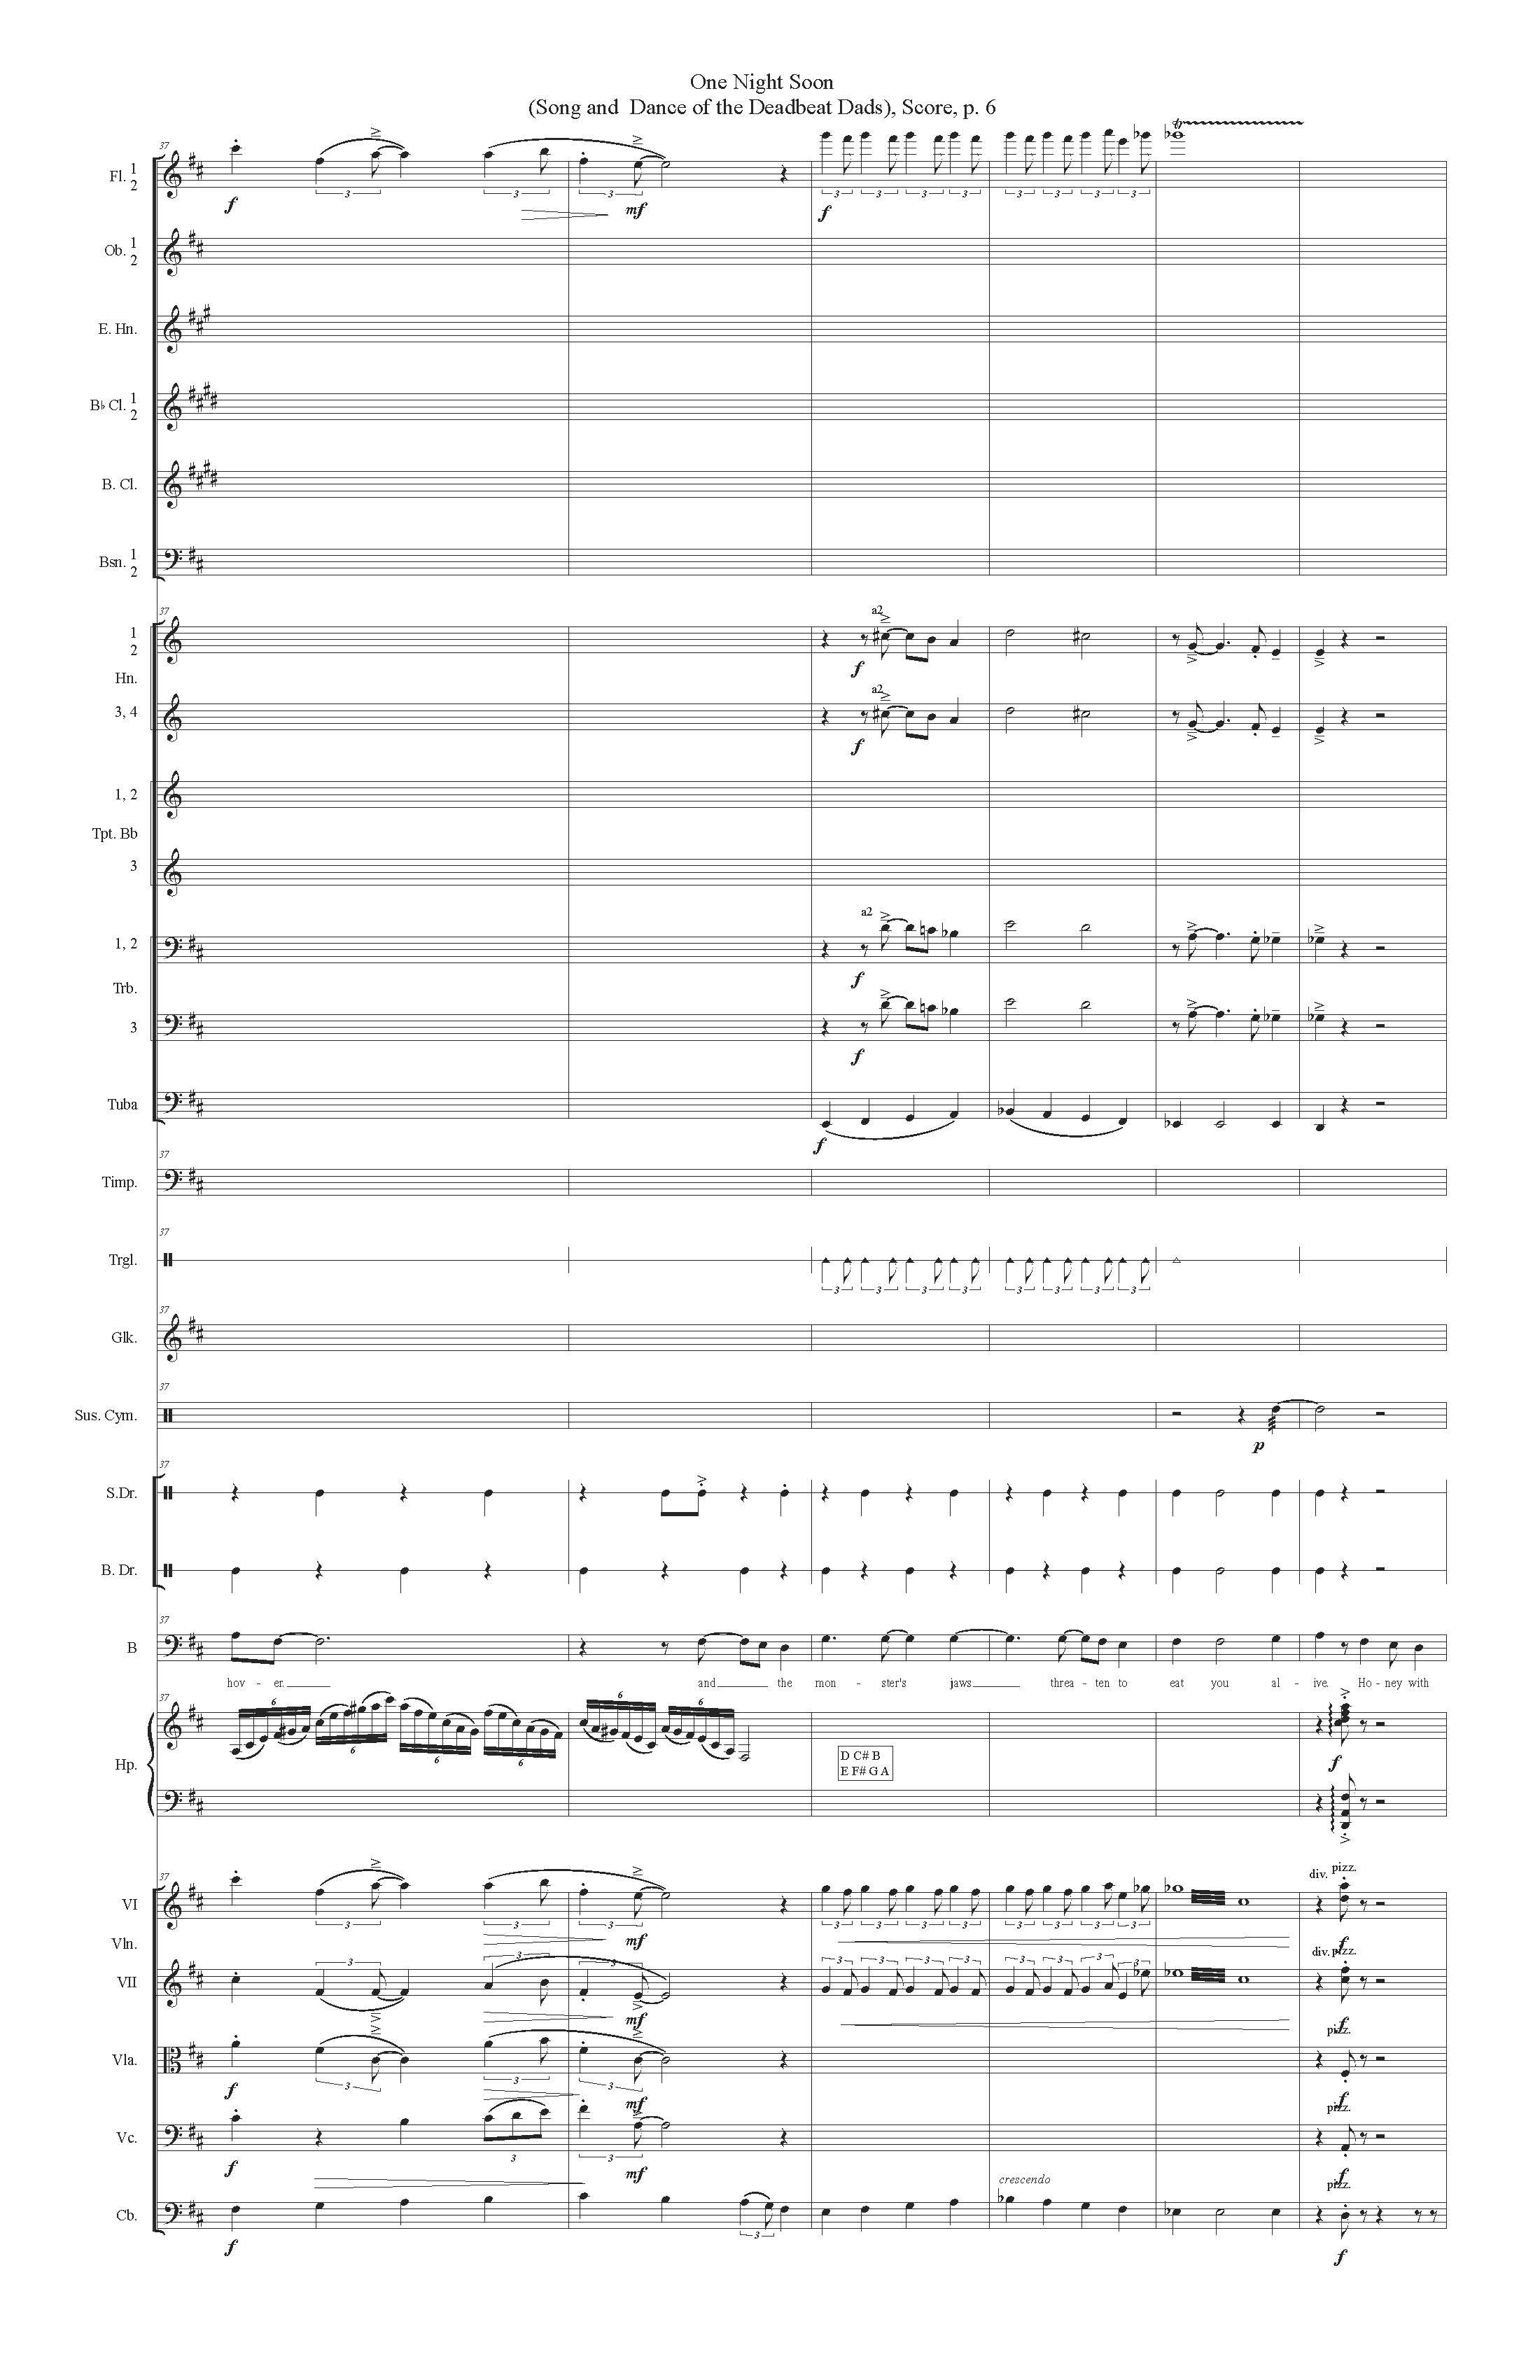 ONE NIGHT SOON ORCH - Score_Page_06.jpg